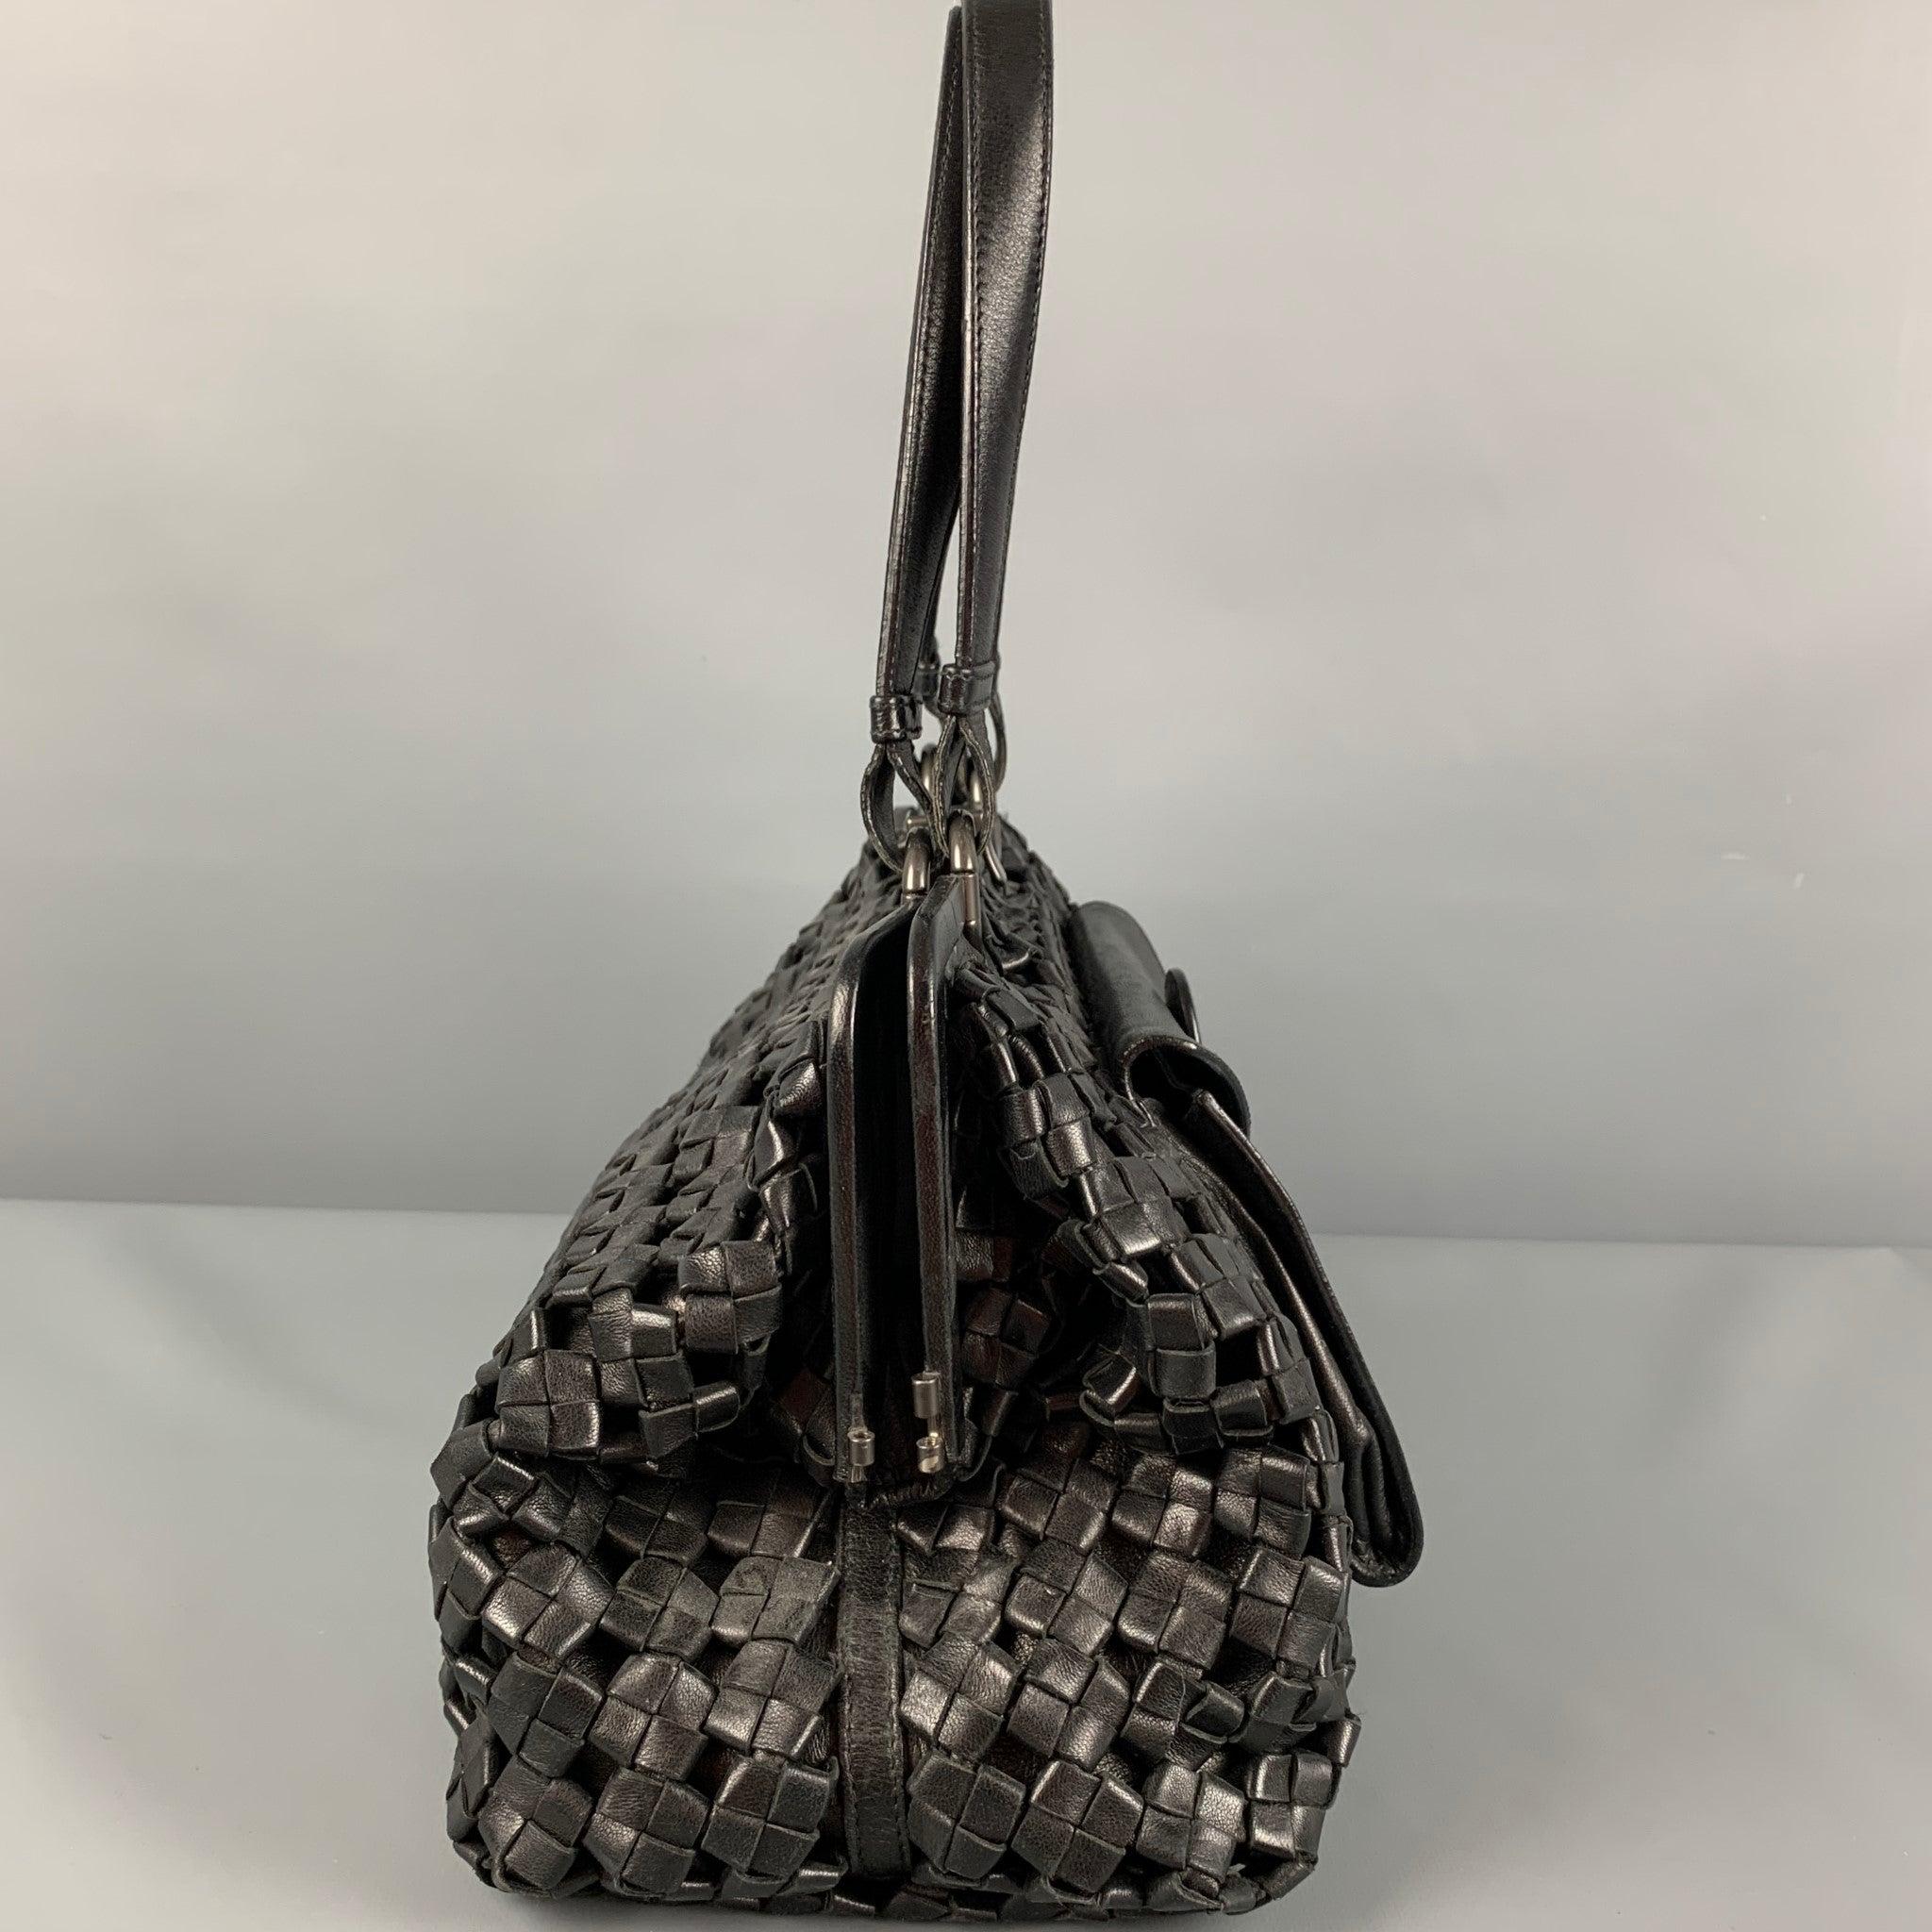 BOTTEGA VENETA 'Limited Edition' bag comes in a black woven leather featuring a satchel style, front pocket detail, top handles, inner pocket, and a top clasp closure. Made in Italy.
Very Good
Pre-Owned Condition. 

Marked:   13498 031/250